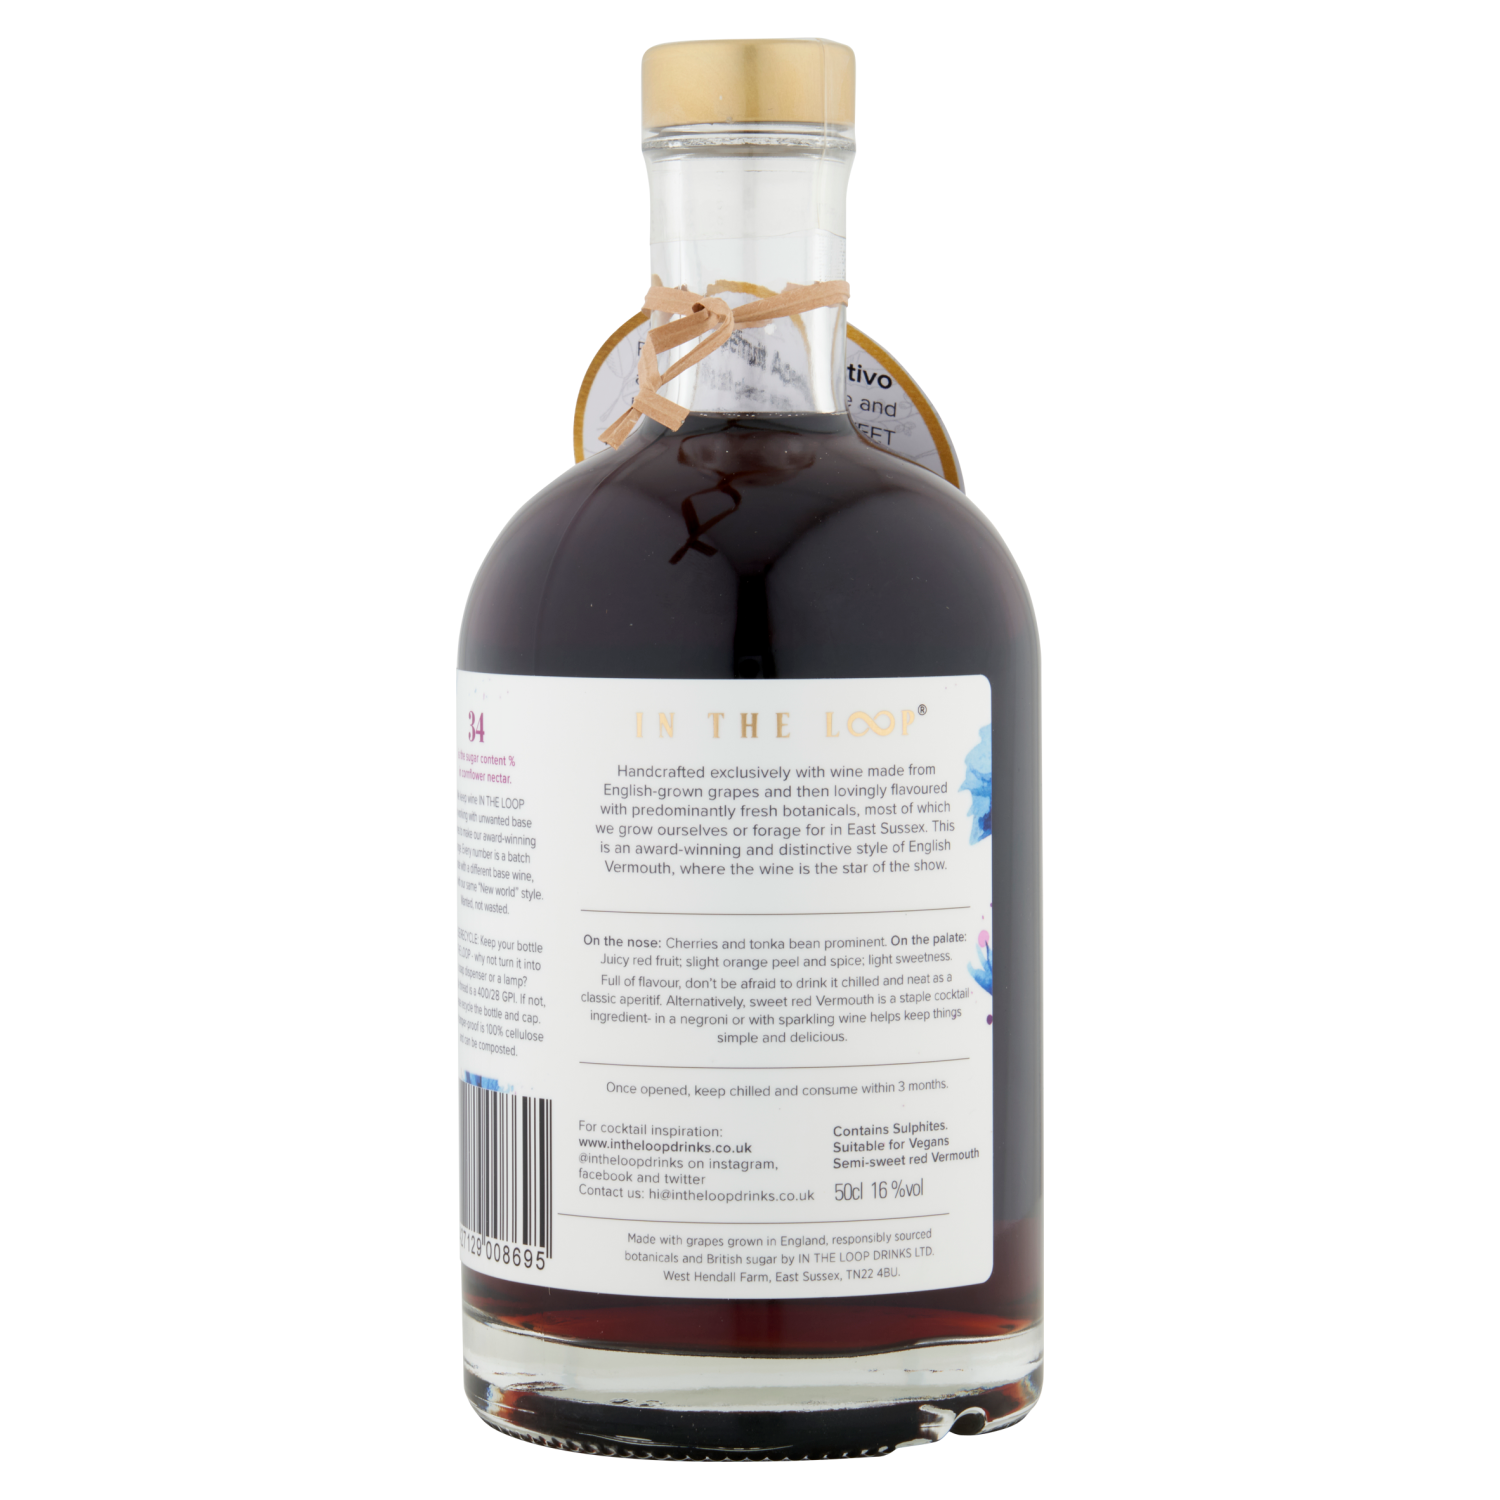 Semi-sweet red English Vermouth